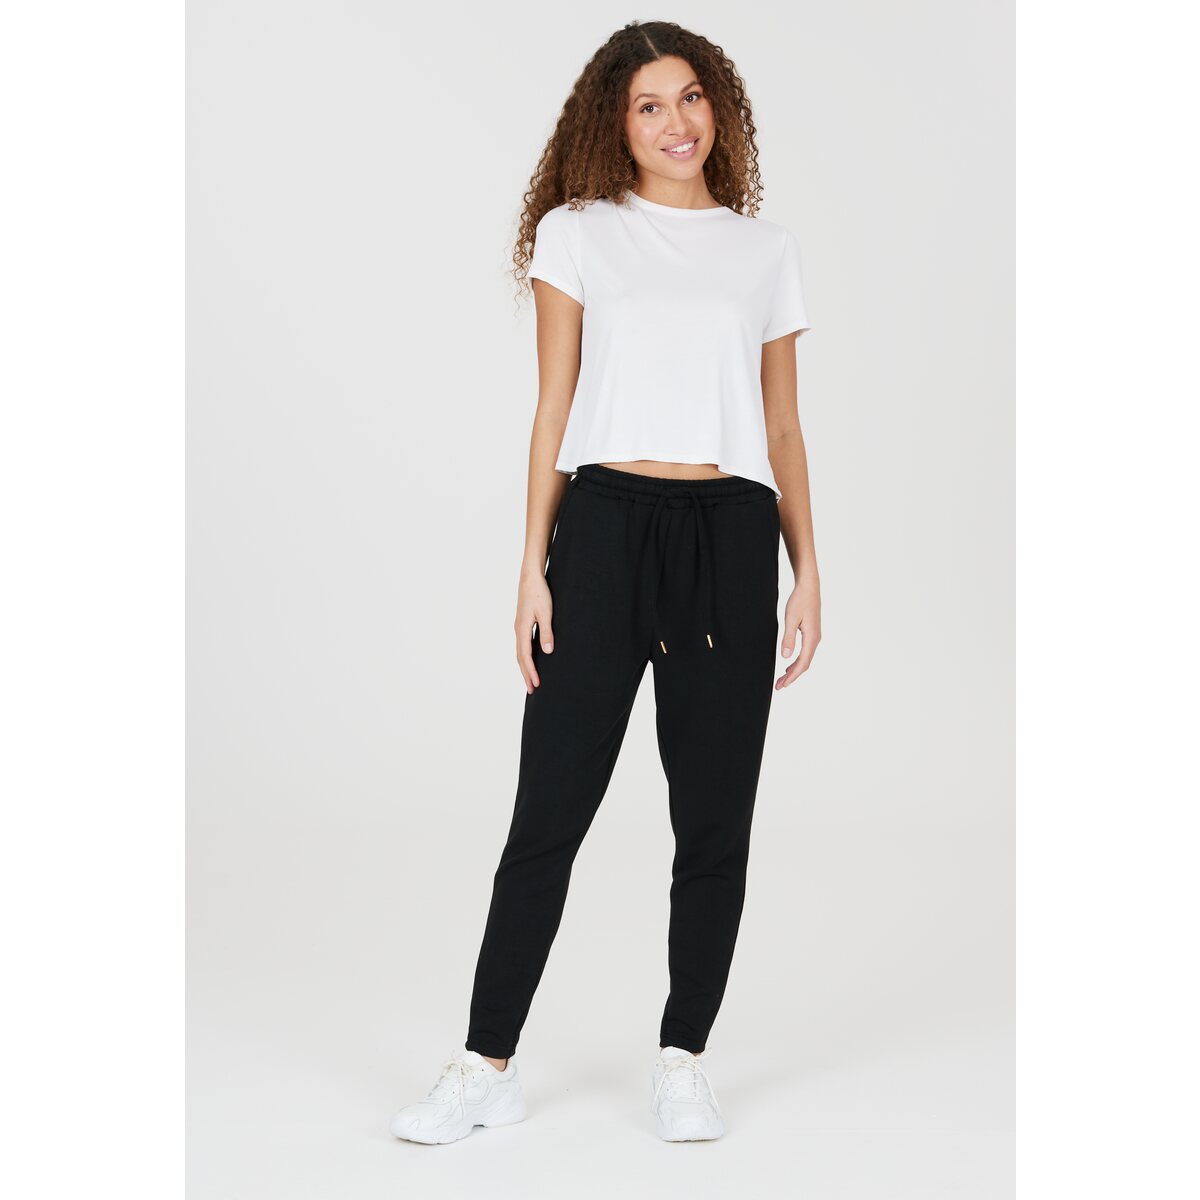 Athlecia Jacey V2 Womenswear Sweat Pants - Black 1 Shaws Department Stores